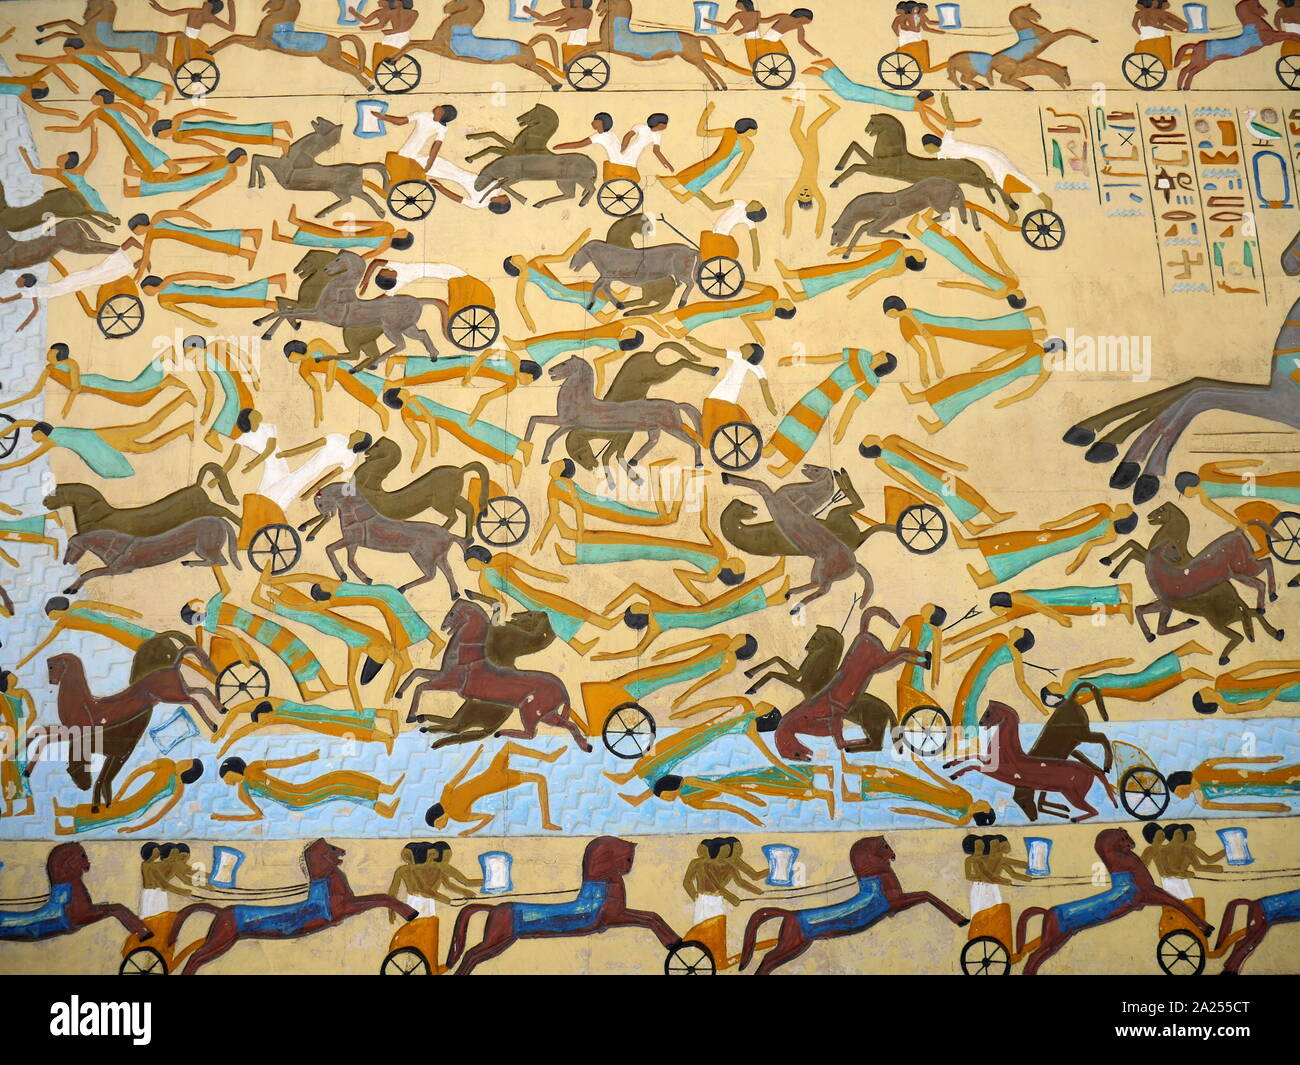 Reconstruction of a painted fresco depicting a battle scene in ancient Egypt. Stock Photo